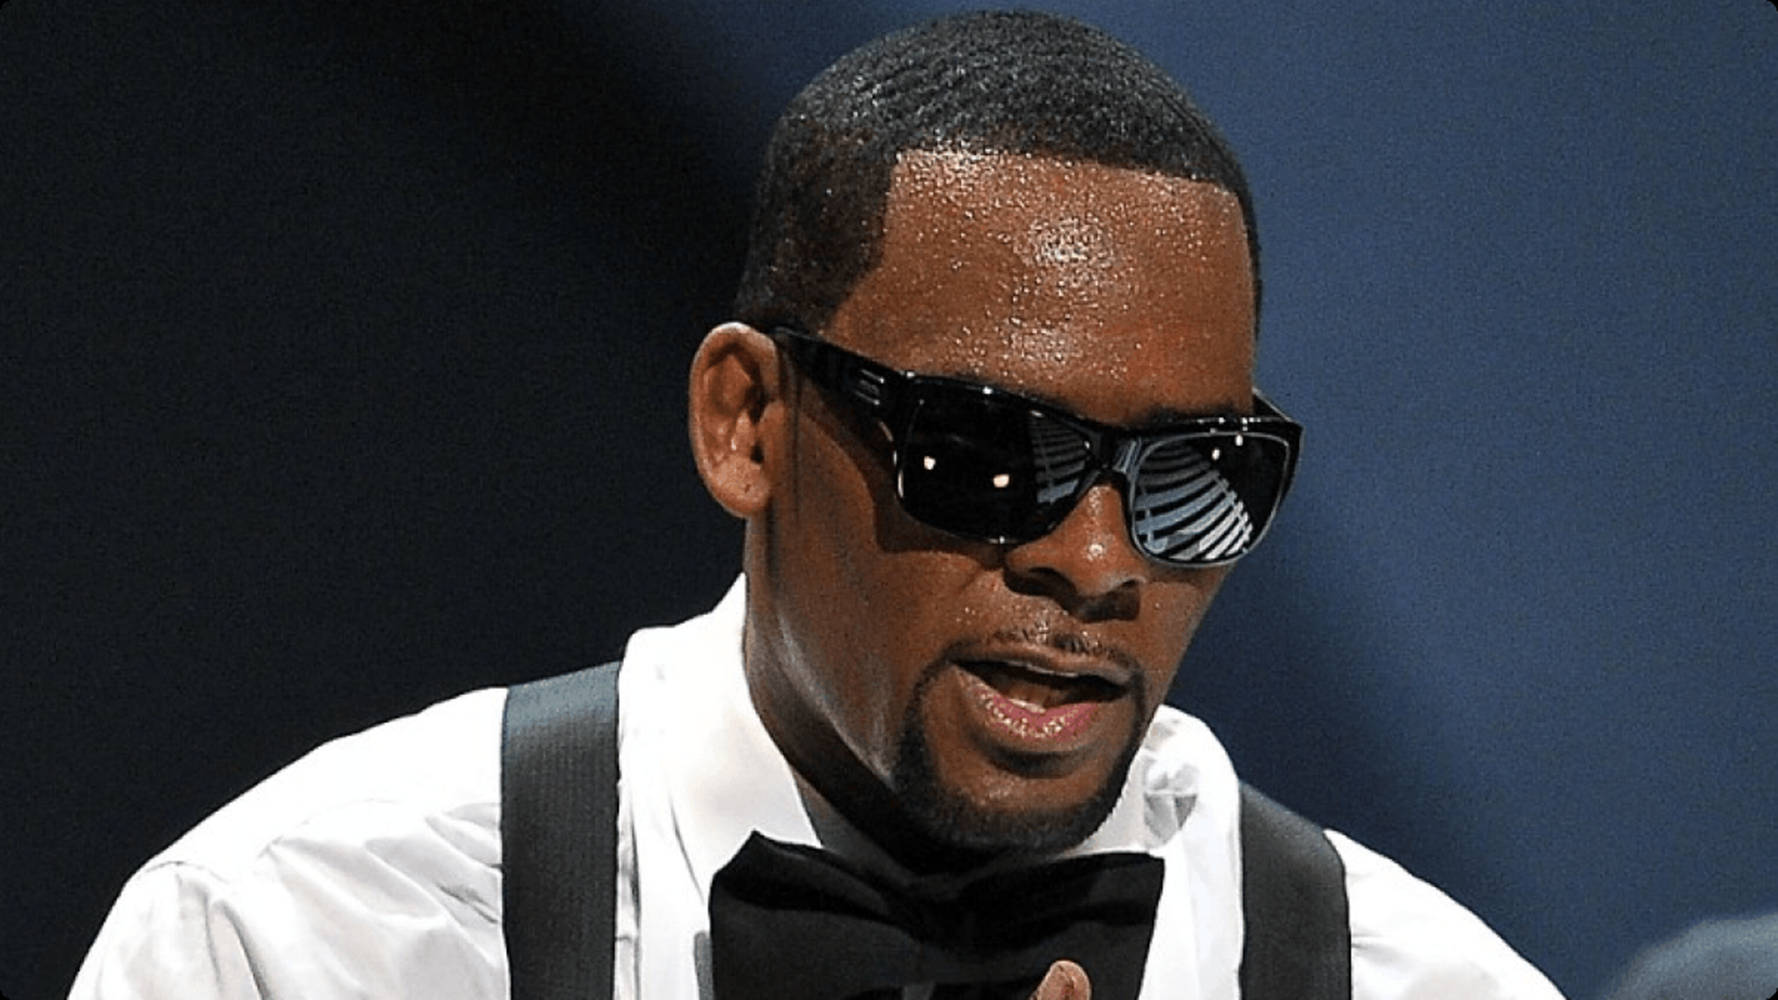 Singer R Kelly With Black Sunglasses